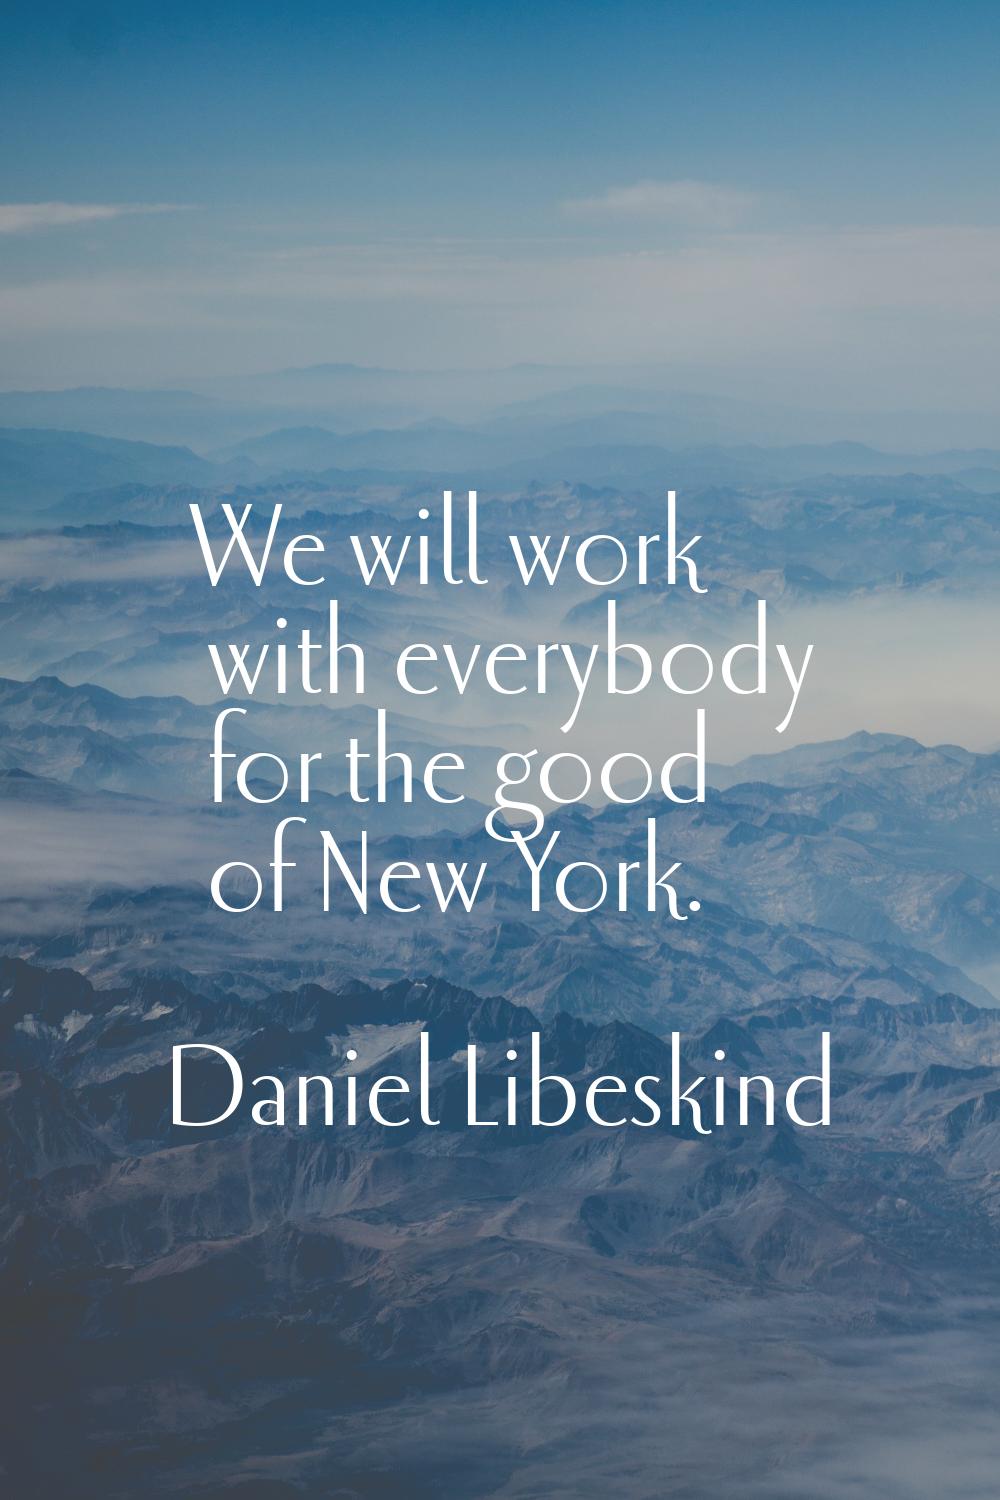 We will work with everybody for the good of New York.